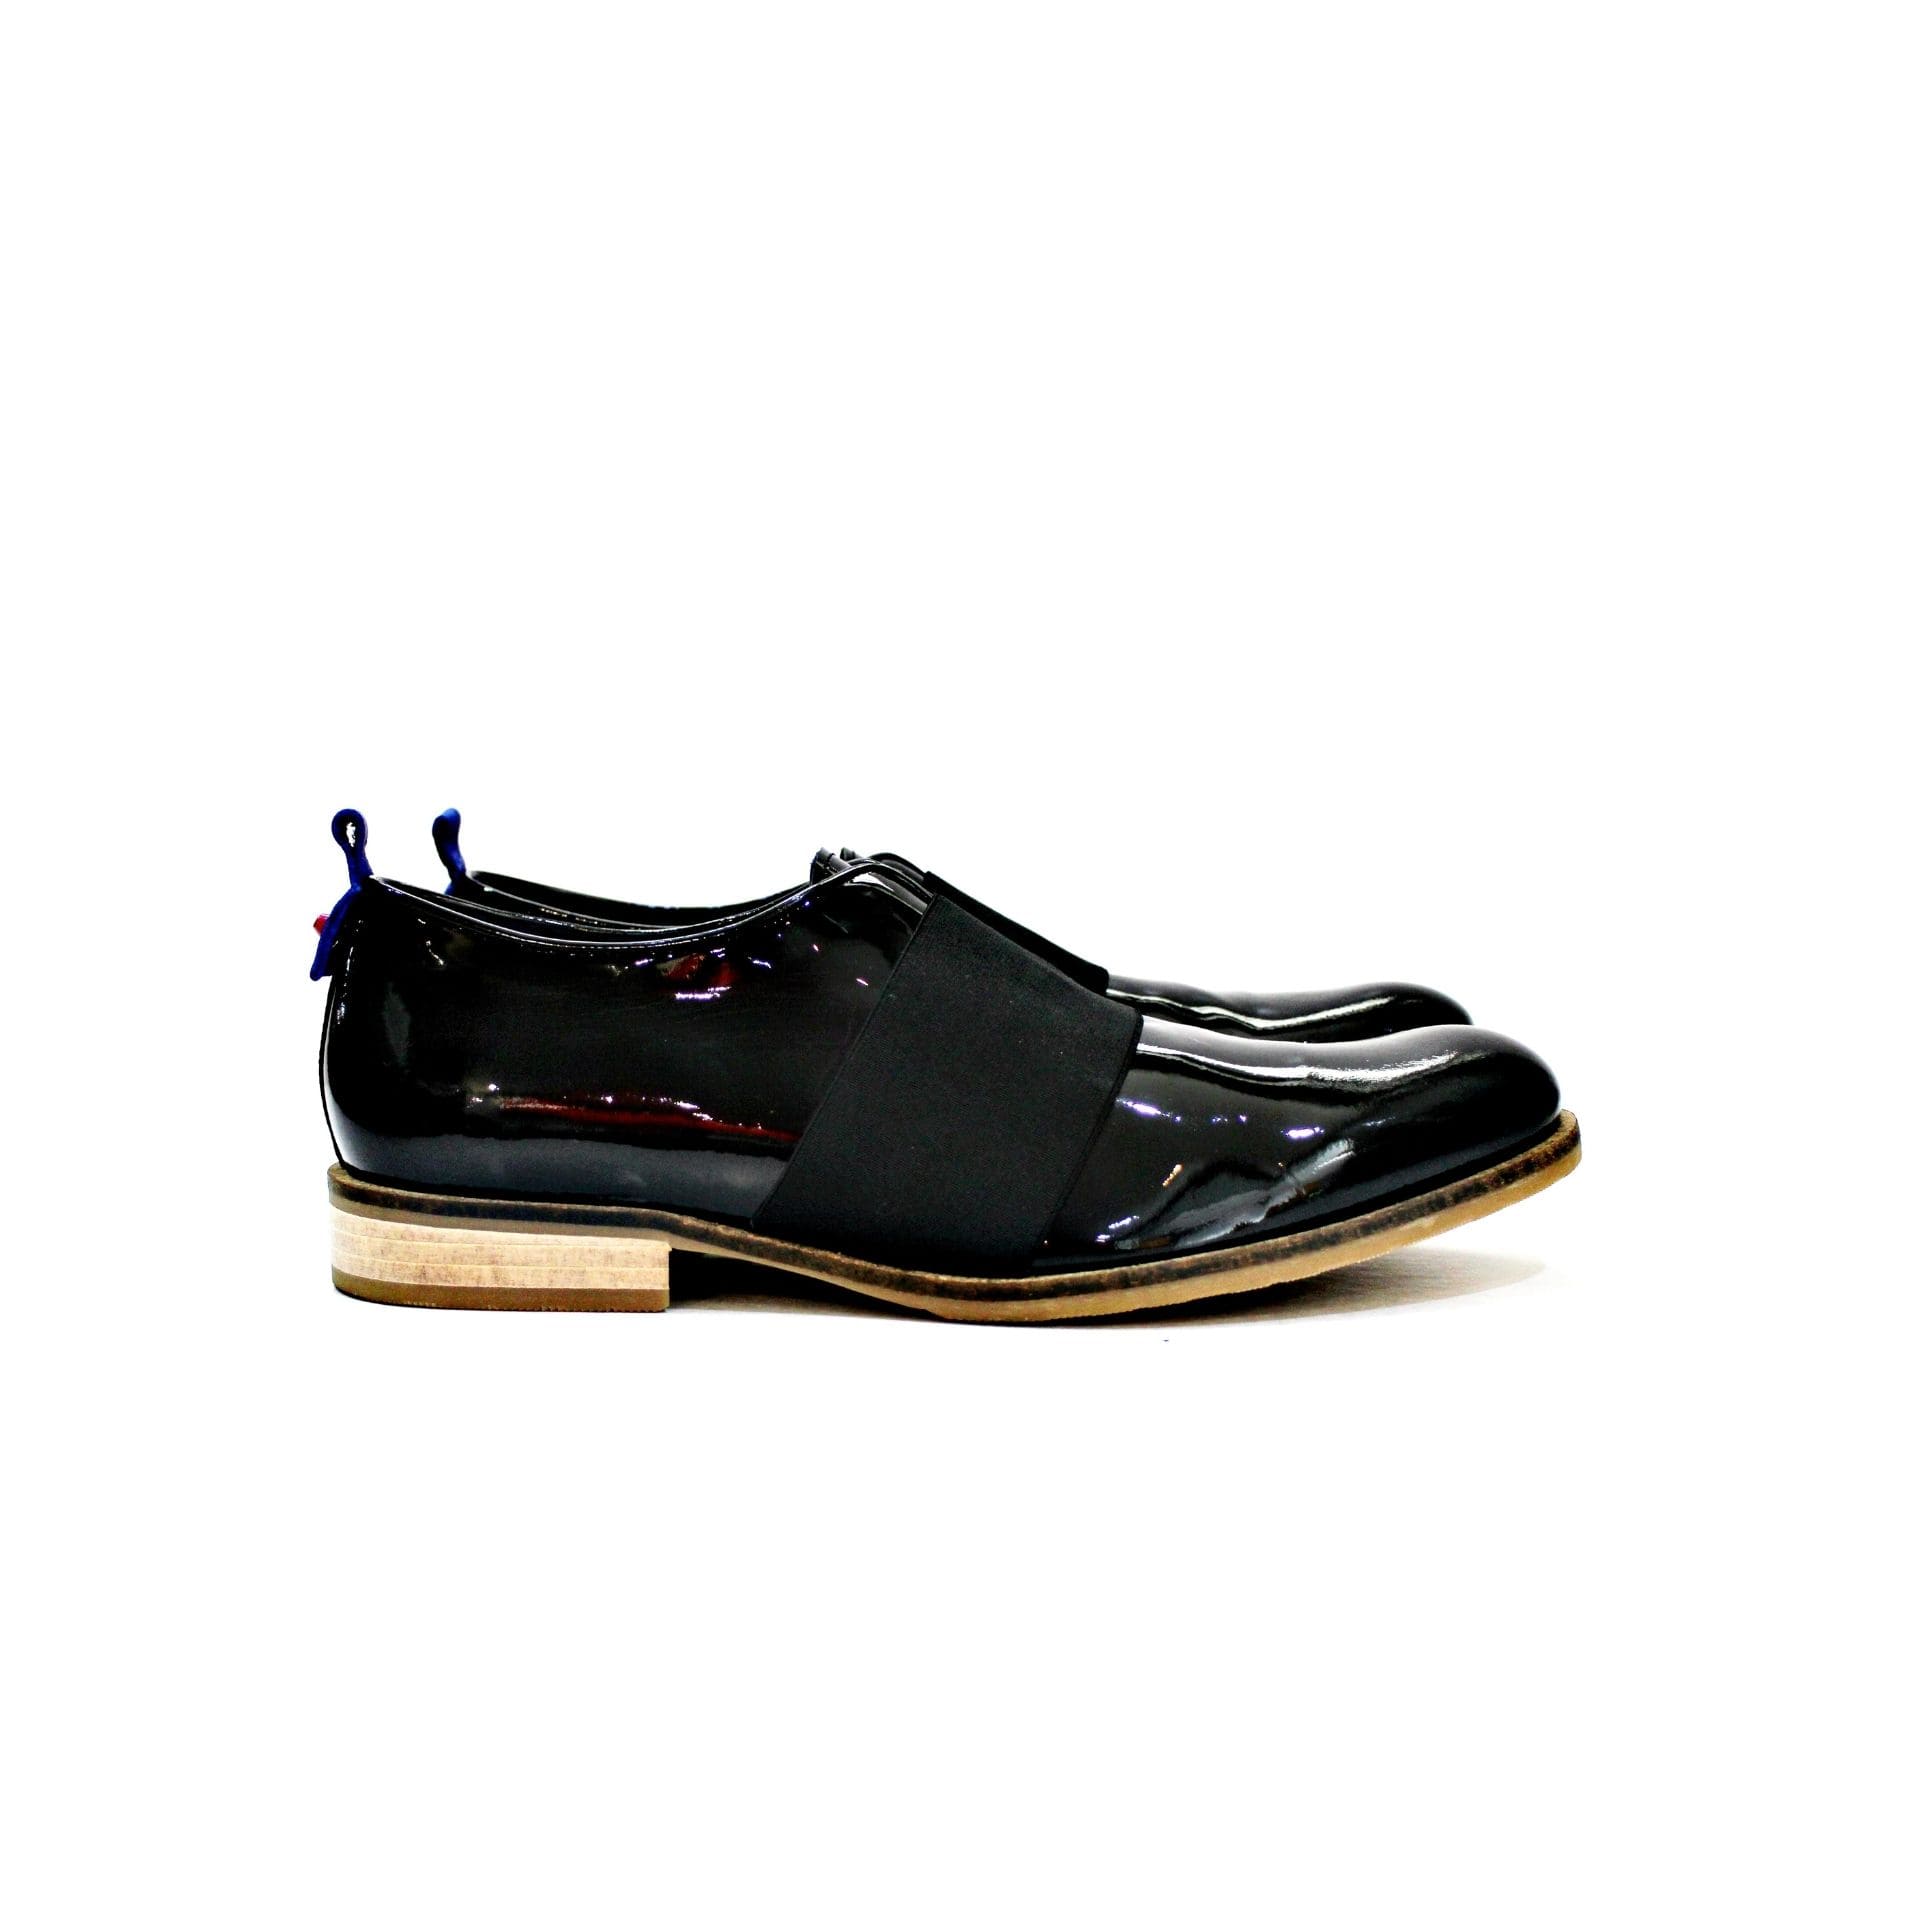 Shoe consisting of varnish, elastic, with all leather lining, leather sole with rubber trail.